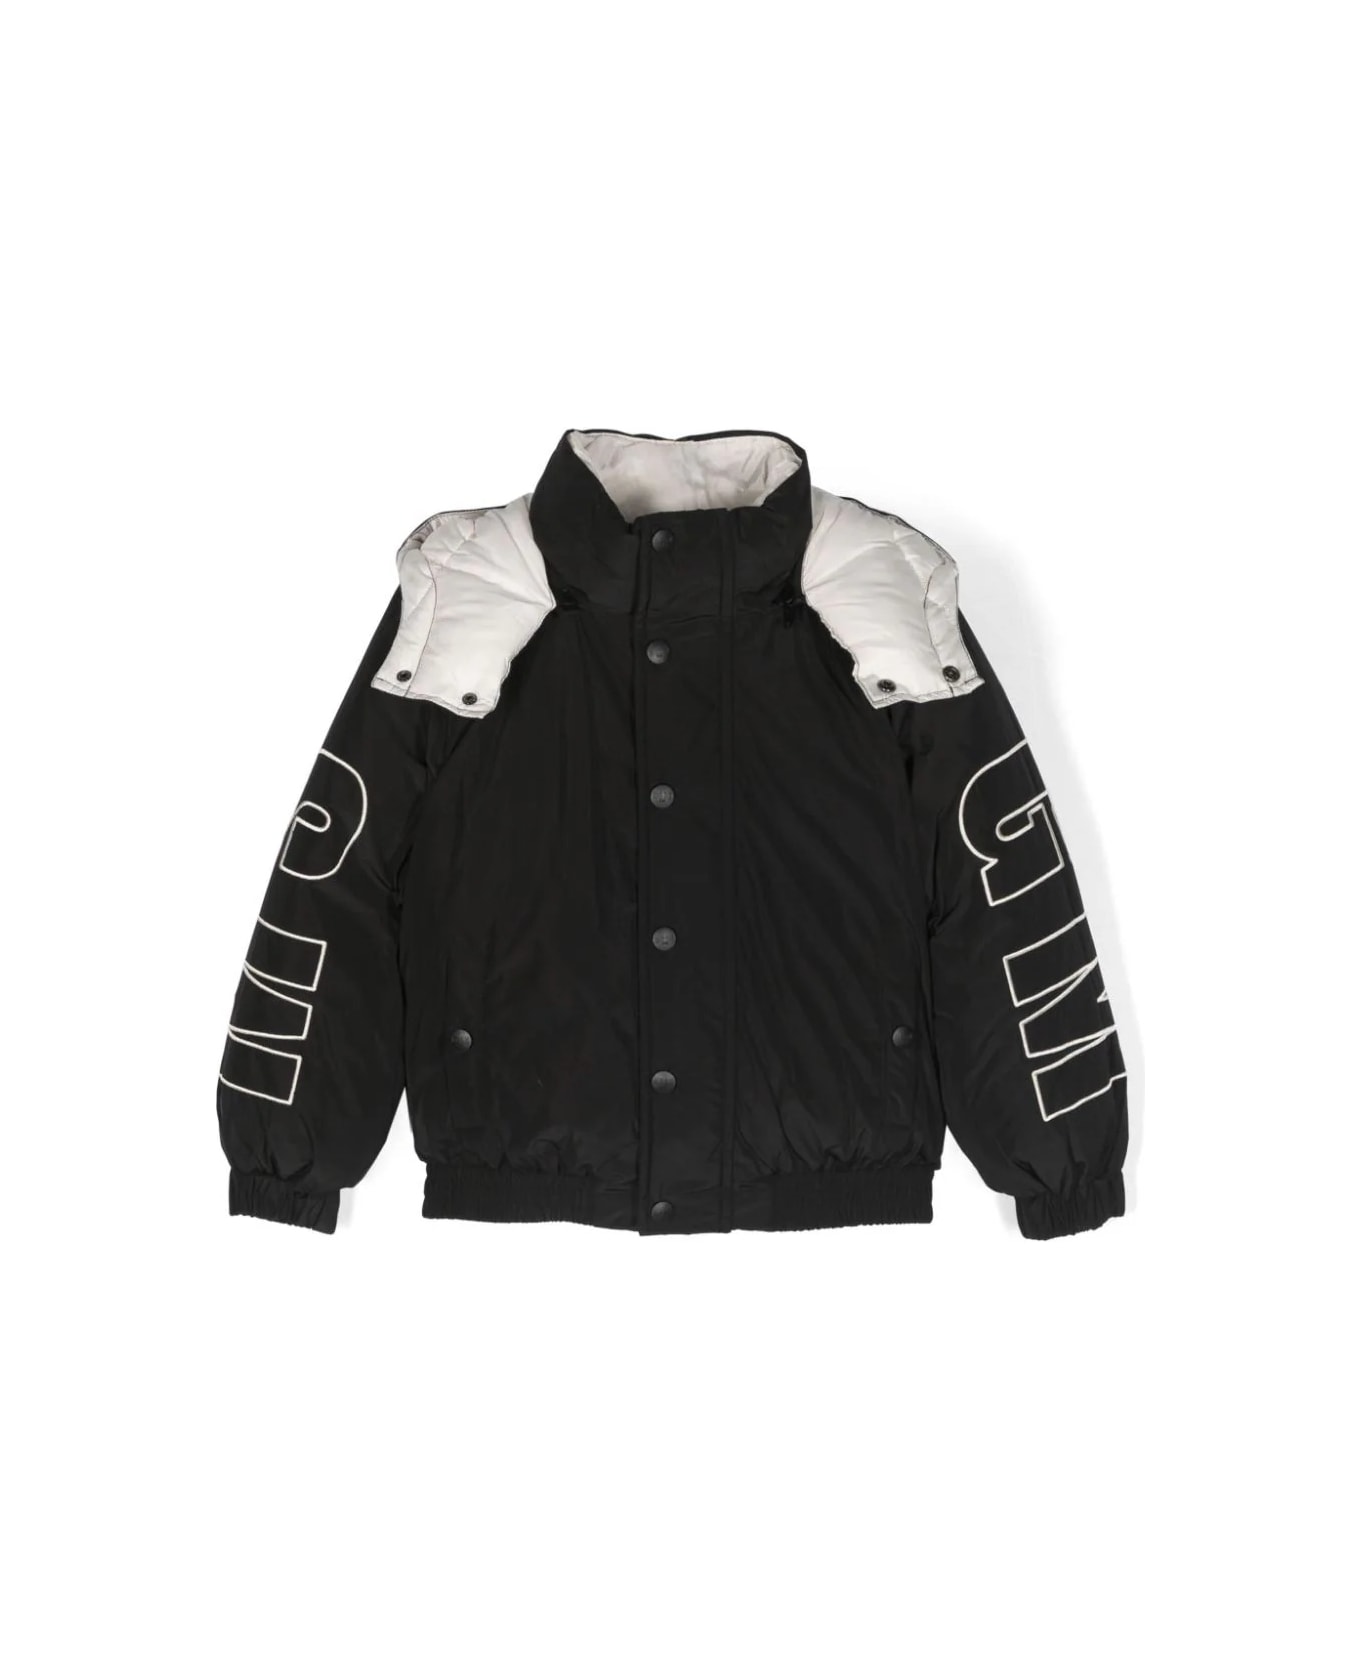 MSGM Black And White Puffer Jacket With Logo - Black